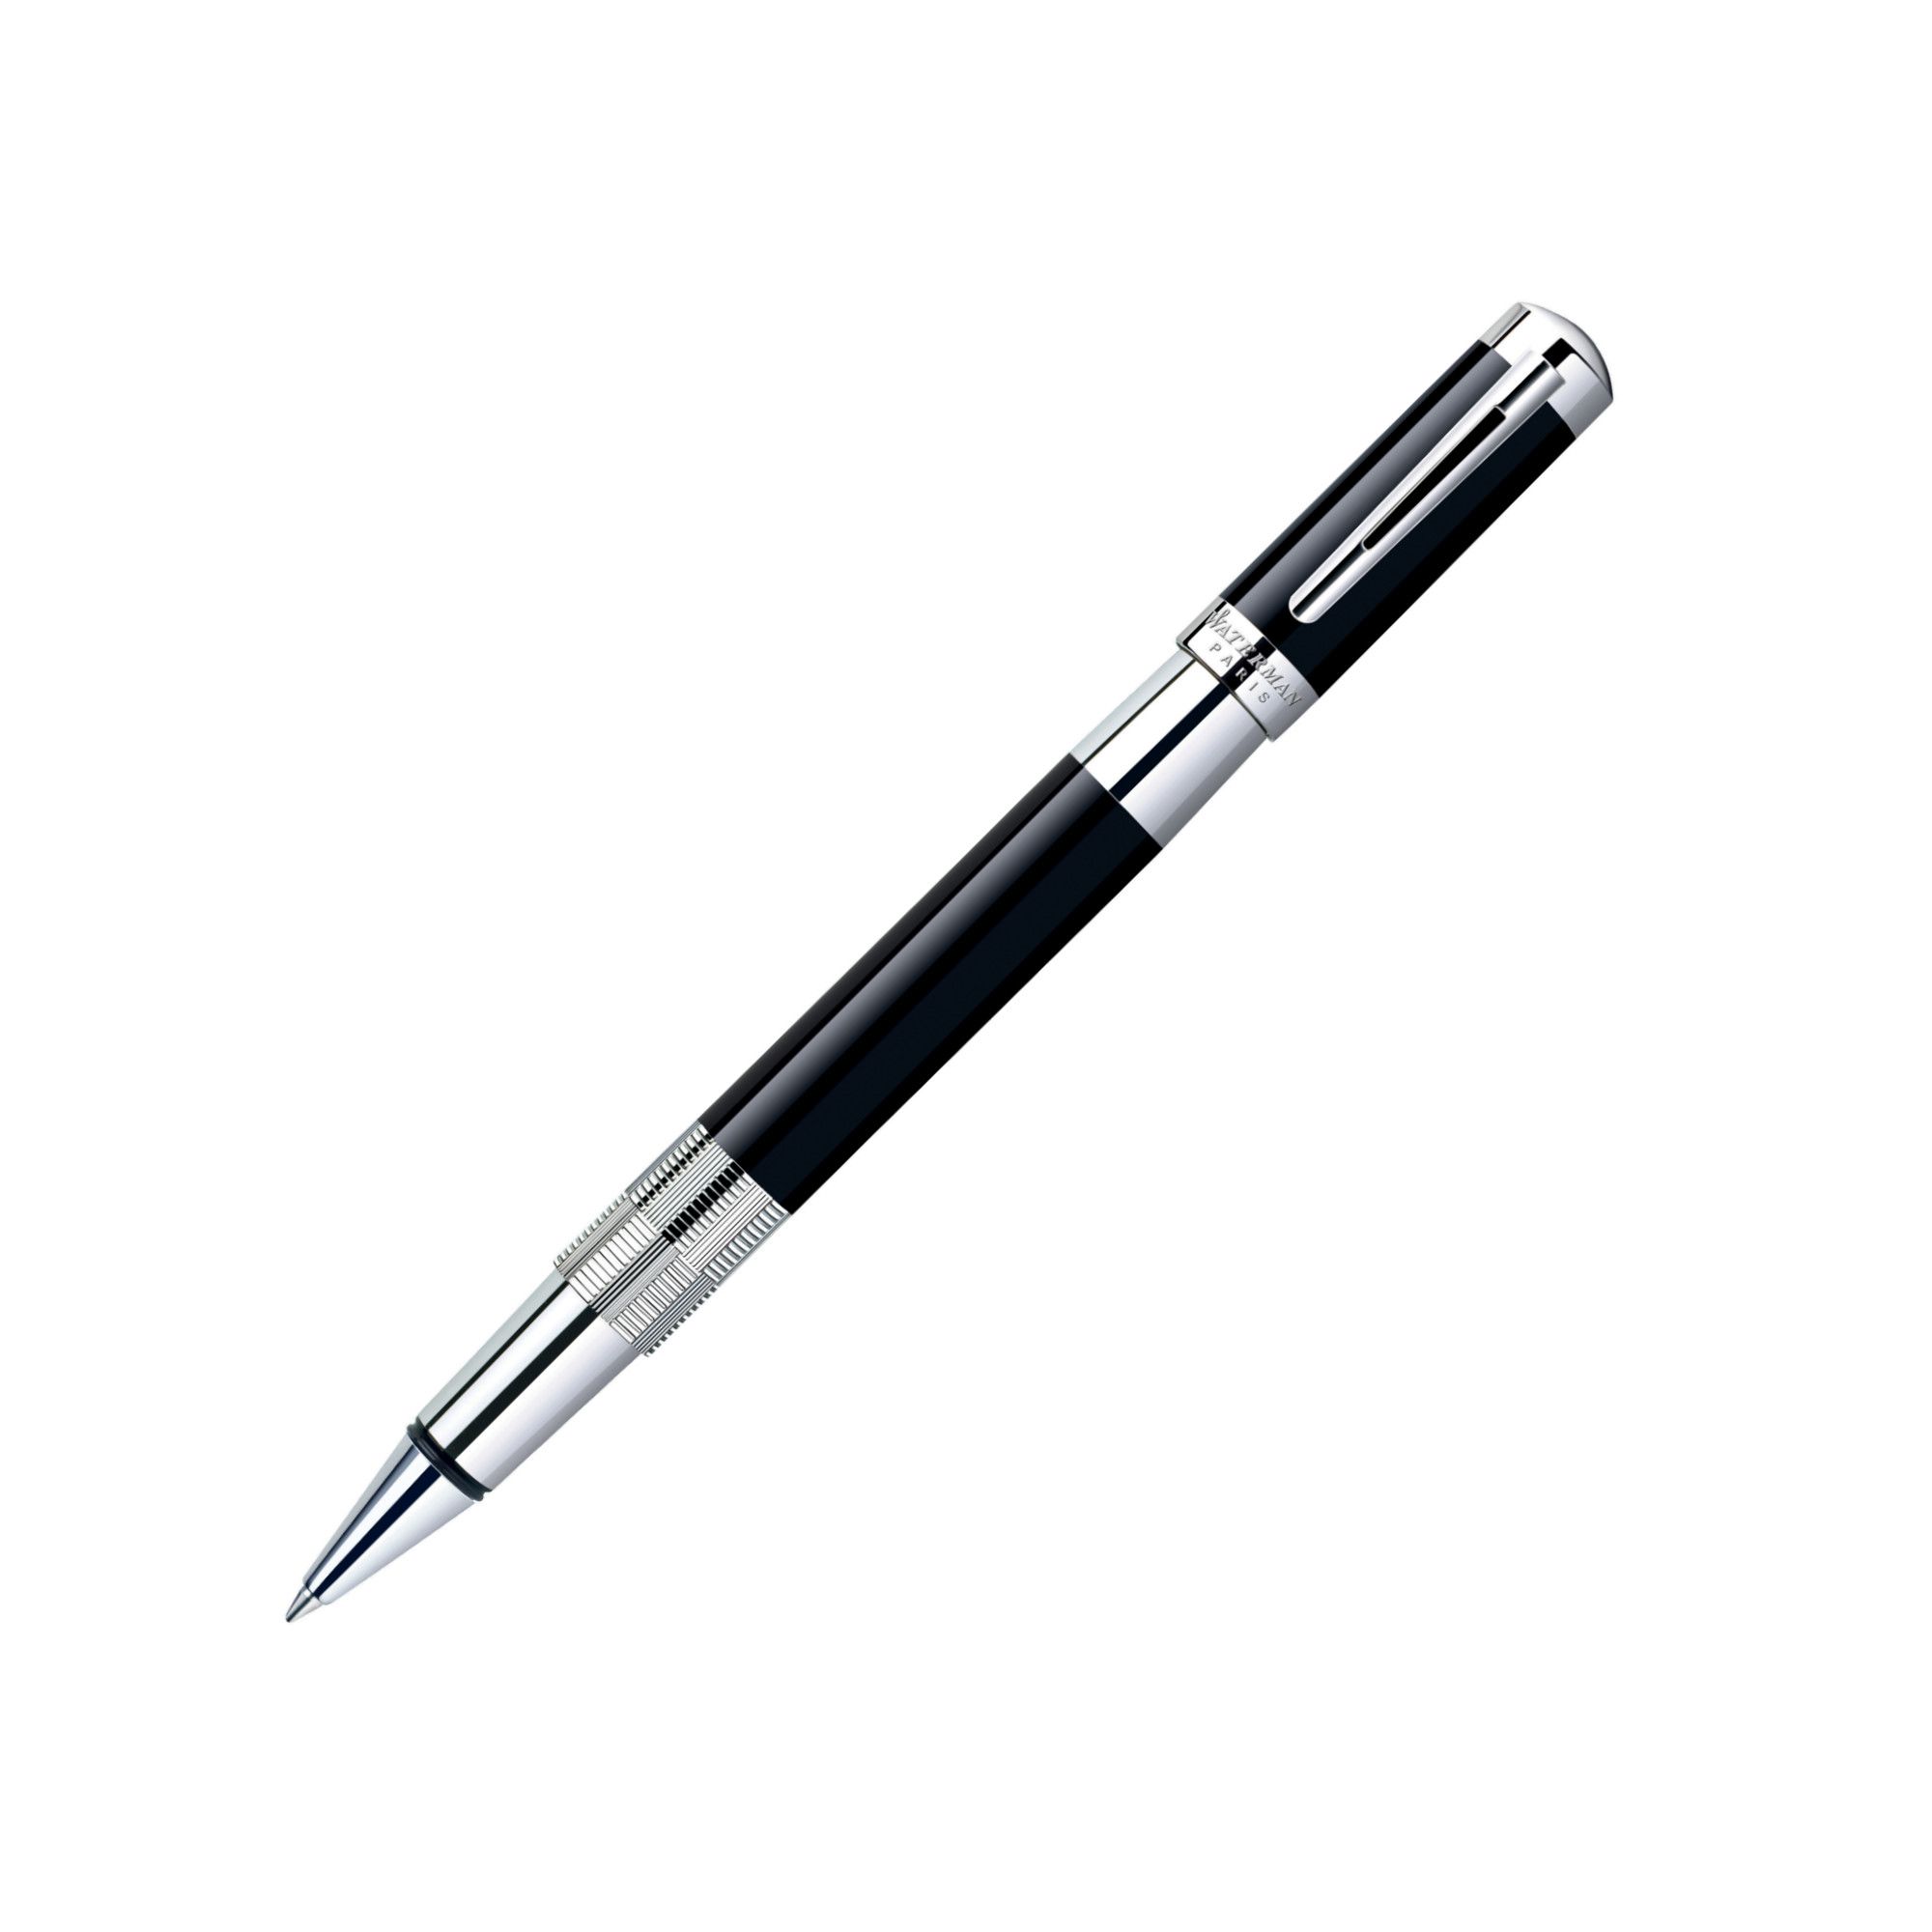 Waterman Elegance Black Lacquer and Chrome Rollerball Pen at Tesco Direct